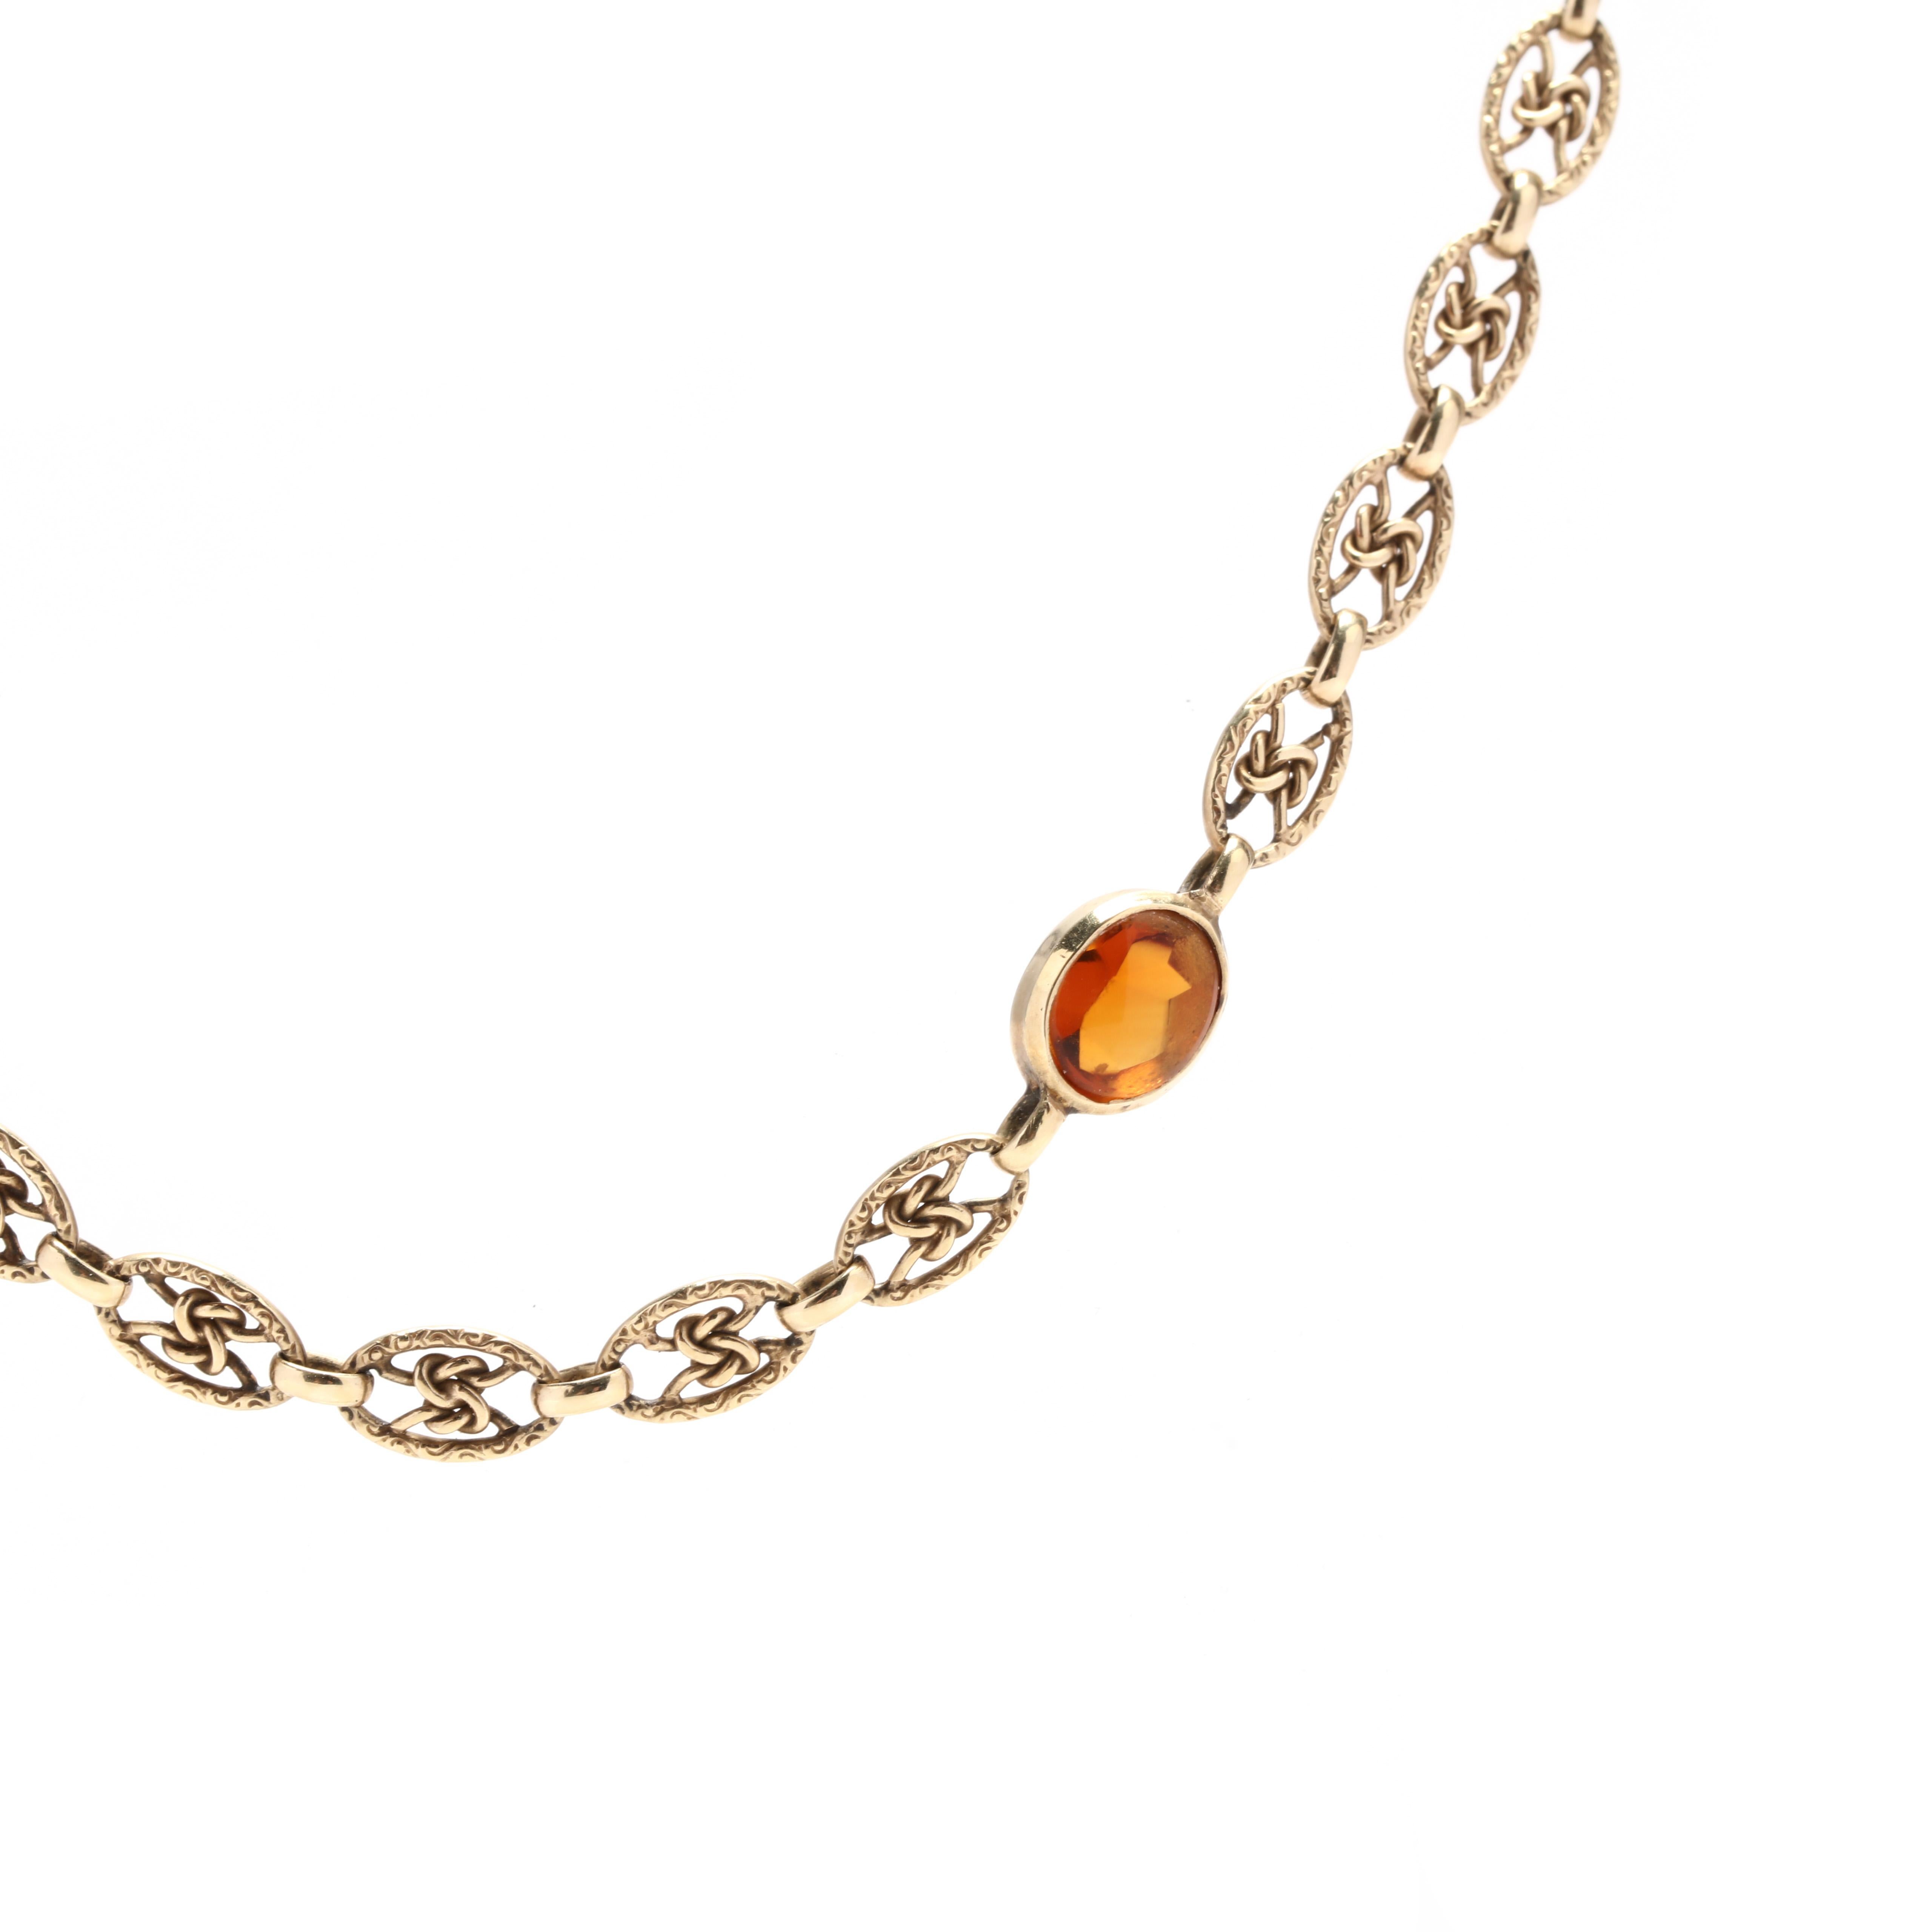 A vintage 14 karat yellow gold citrine knot chain necklace. This necklace features an oval link design with knot motifs in the center and with seven oval cut bezel set madeira citrine stations throughout.

Stones:
- citrine, 7 stones
- oval cut
-